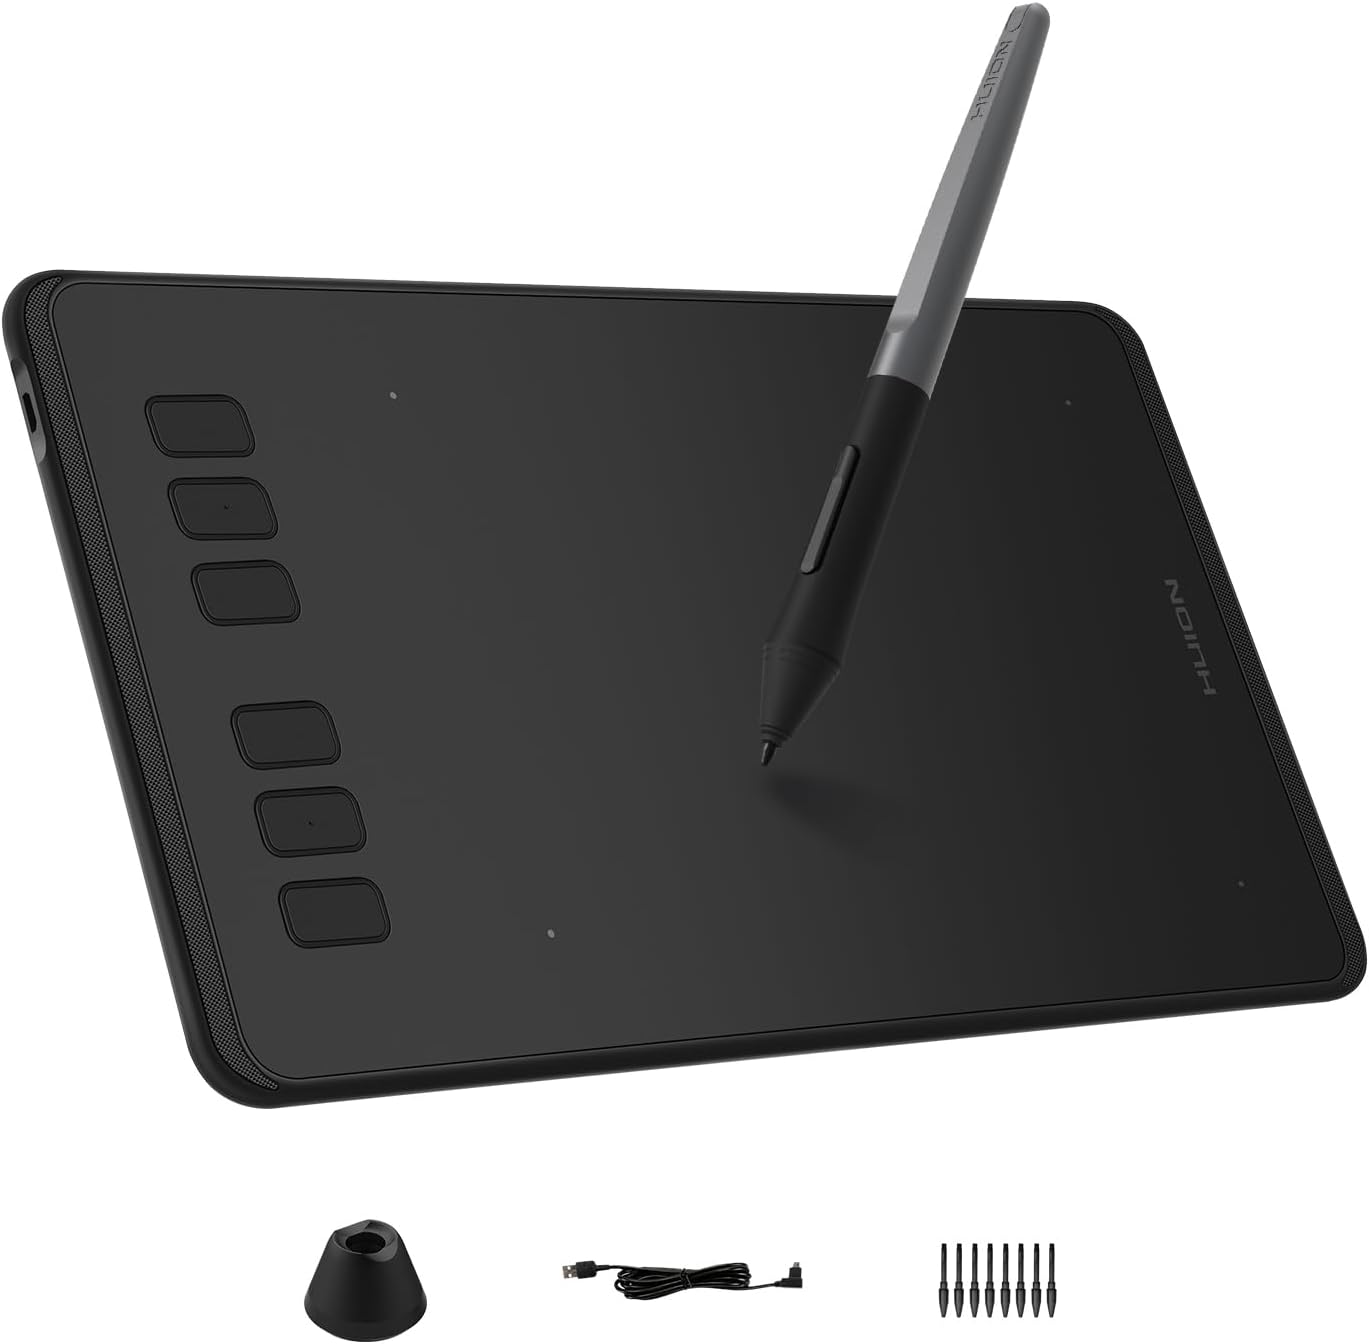 HUION Inspiroy H640P Drawing Tablet, 6x4 inch Art Tablet with Battery-Free Stylus, 8192 Pen Pressure, 6 Hot Keys, Graphics Tablet for Drawing, Writing, Design, Teaching, Work with Mac, PC & Mobile 2